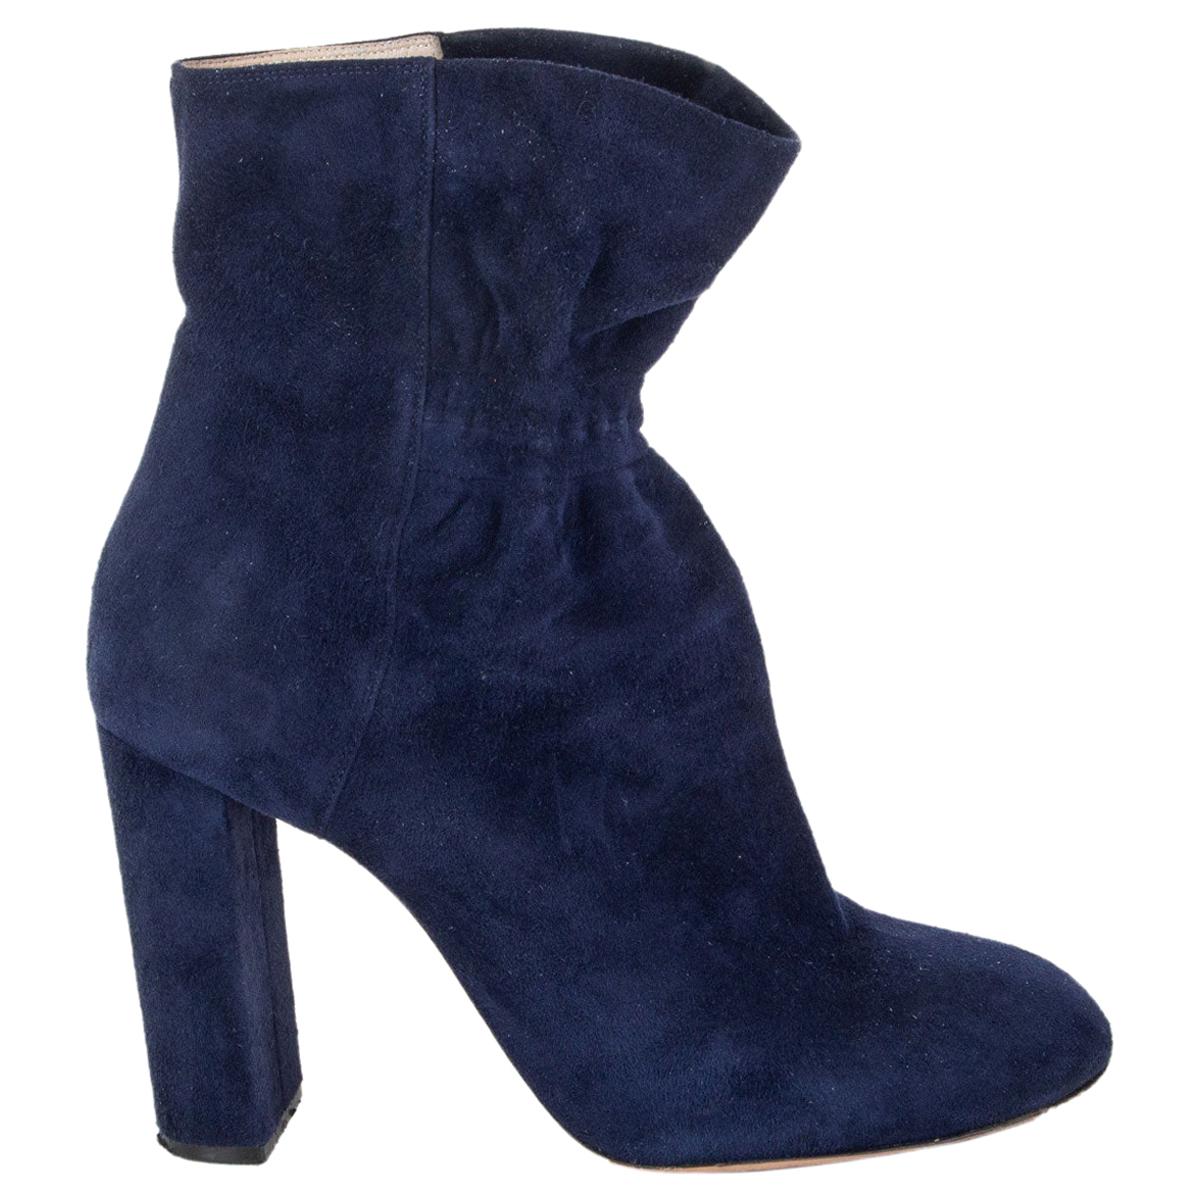 CHLOE navy blue suede Ankle Boots Shoes 38